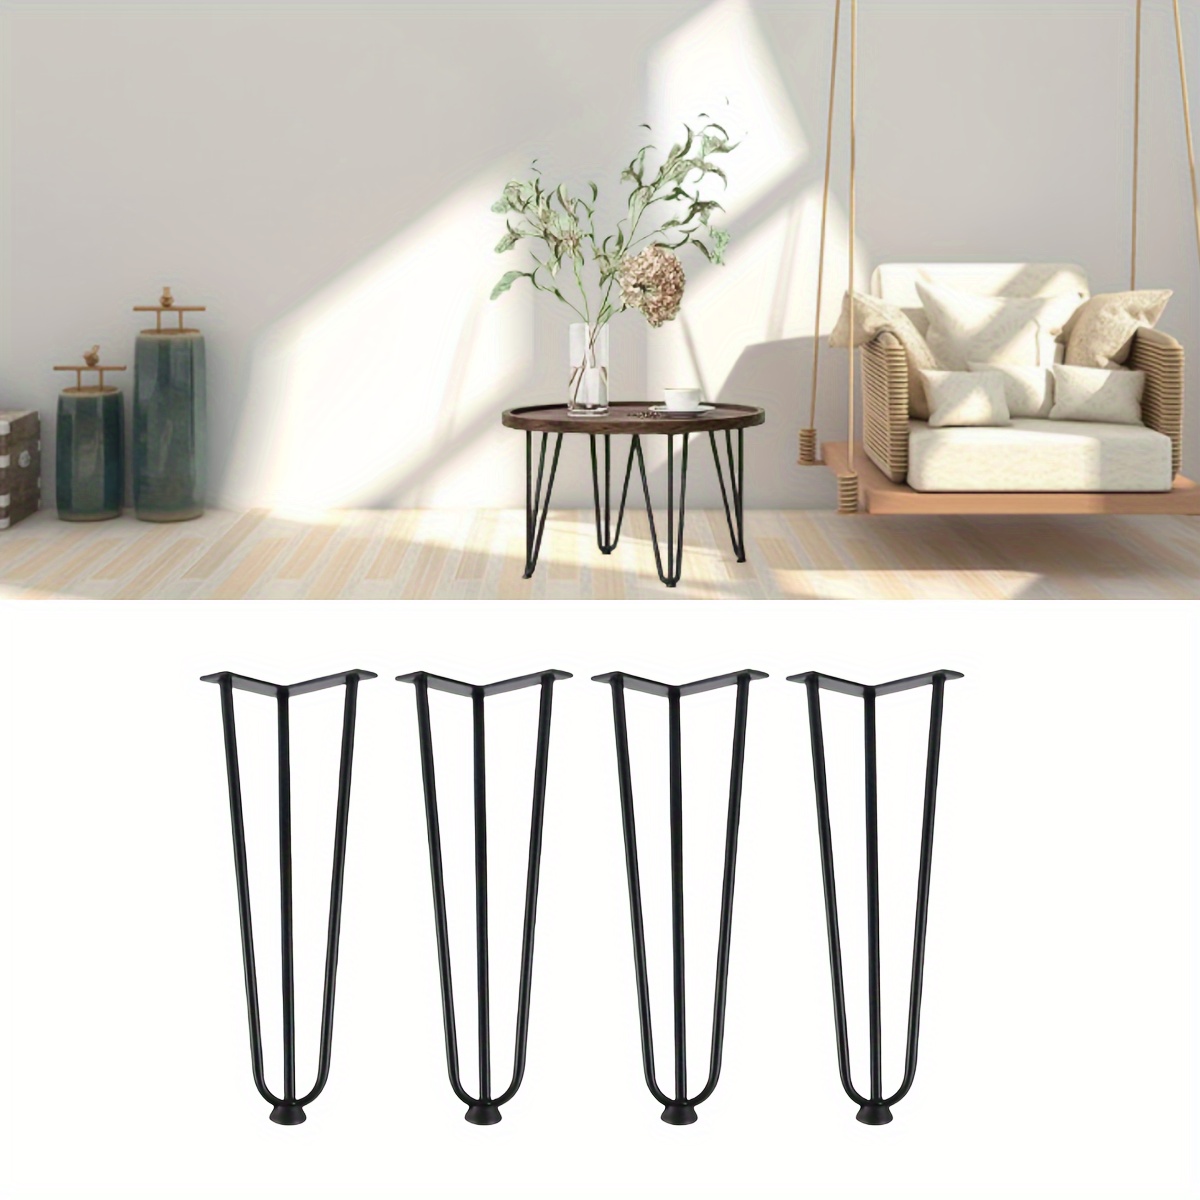 

4pcs Table Legs With 3 Steel Rods, Mid-century Style Support Legs For Coffee Table, Side Table, Night Stand, Furniture Accessories, Home Supplies (white, Black, Golden)